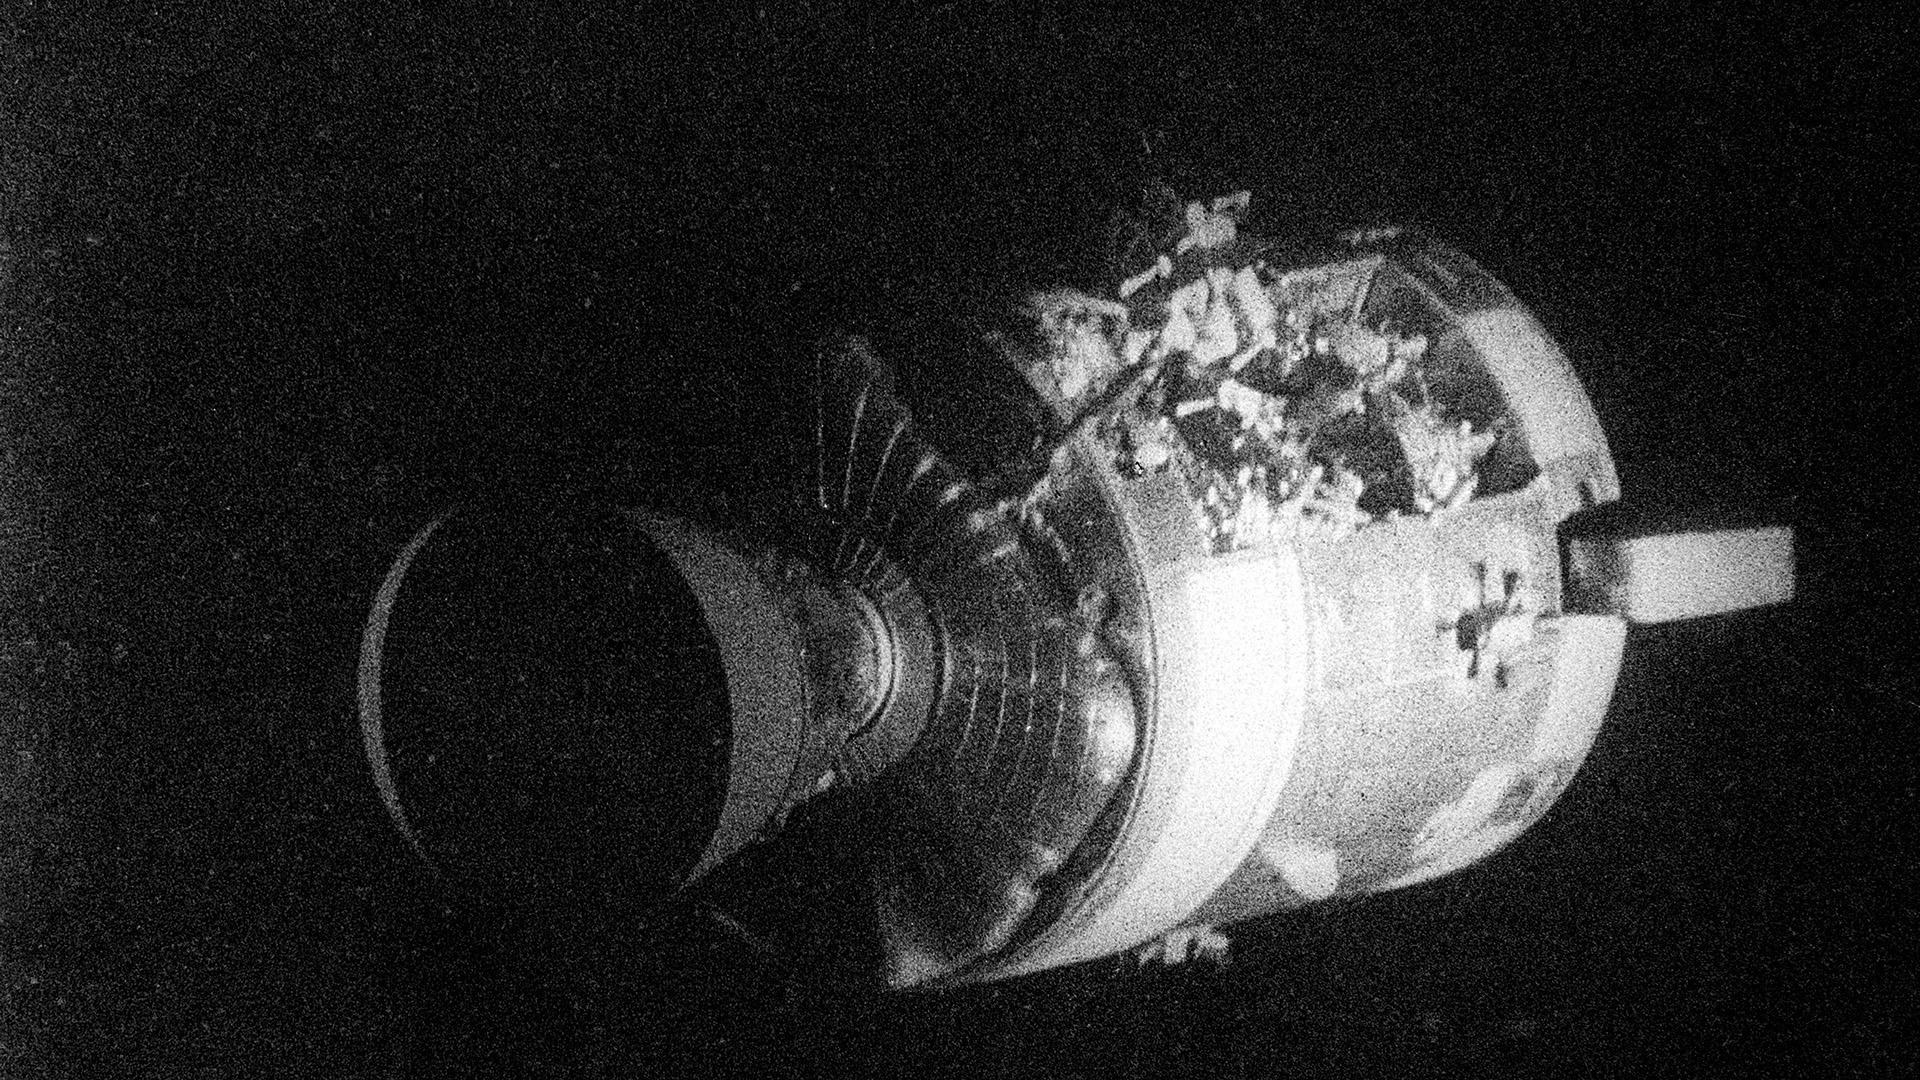 The damaged service module after separation from the command module ‘Odyssey'